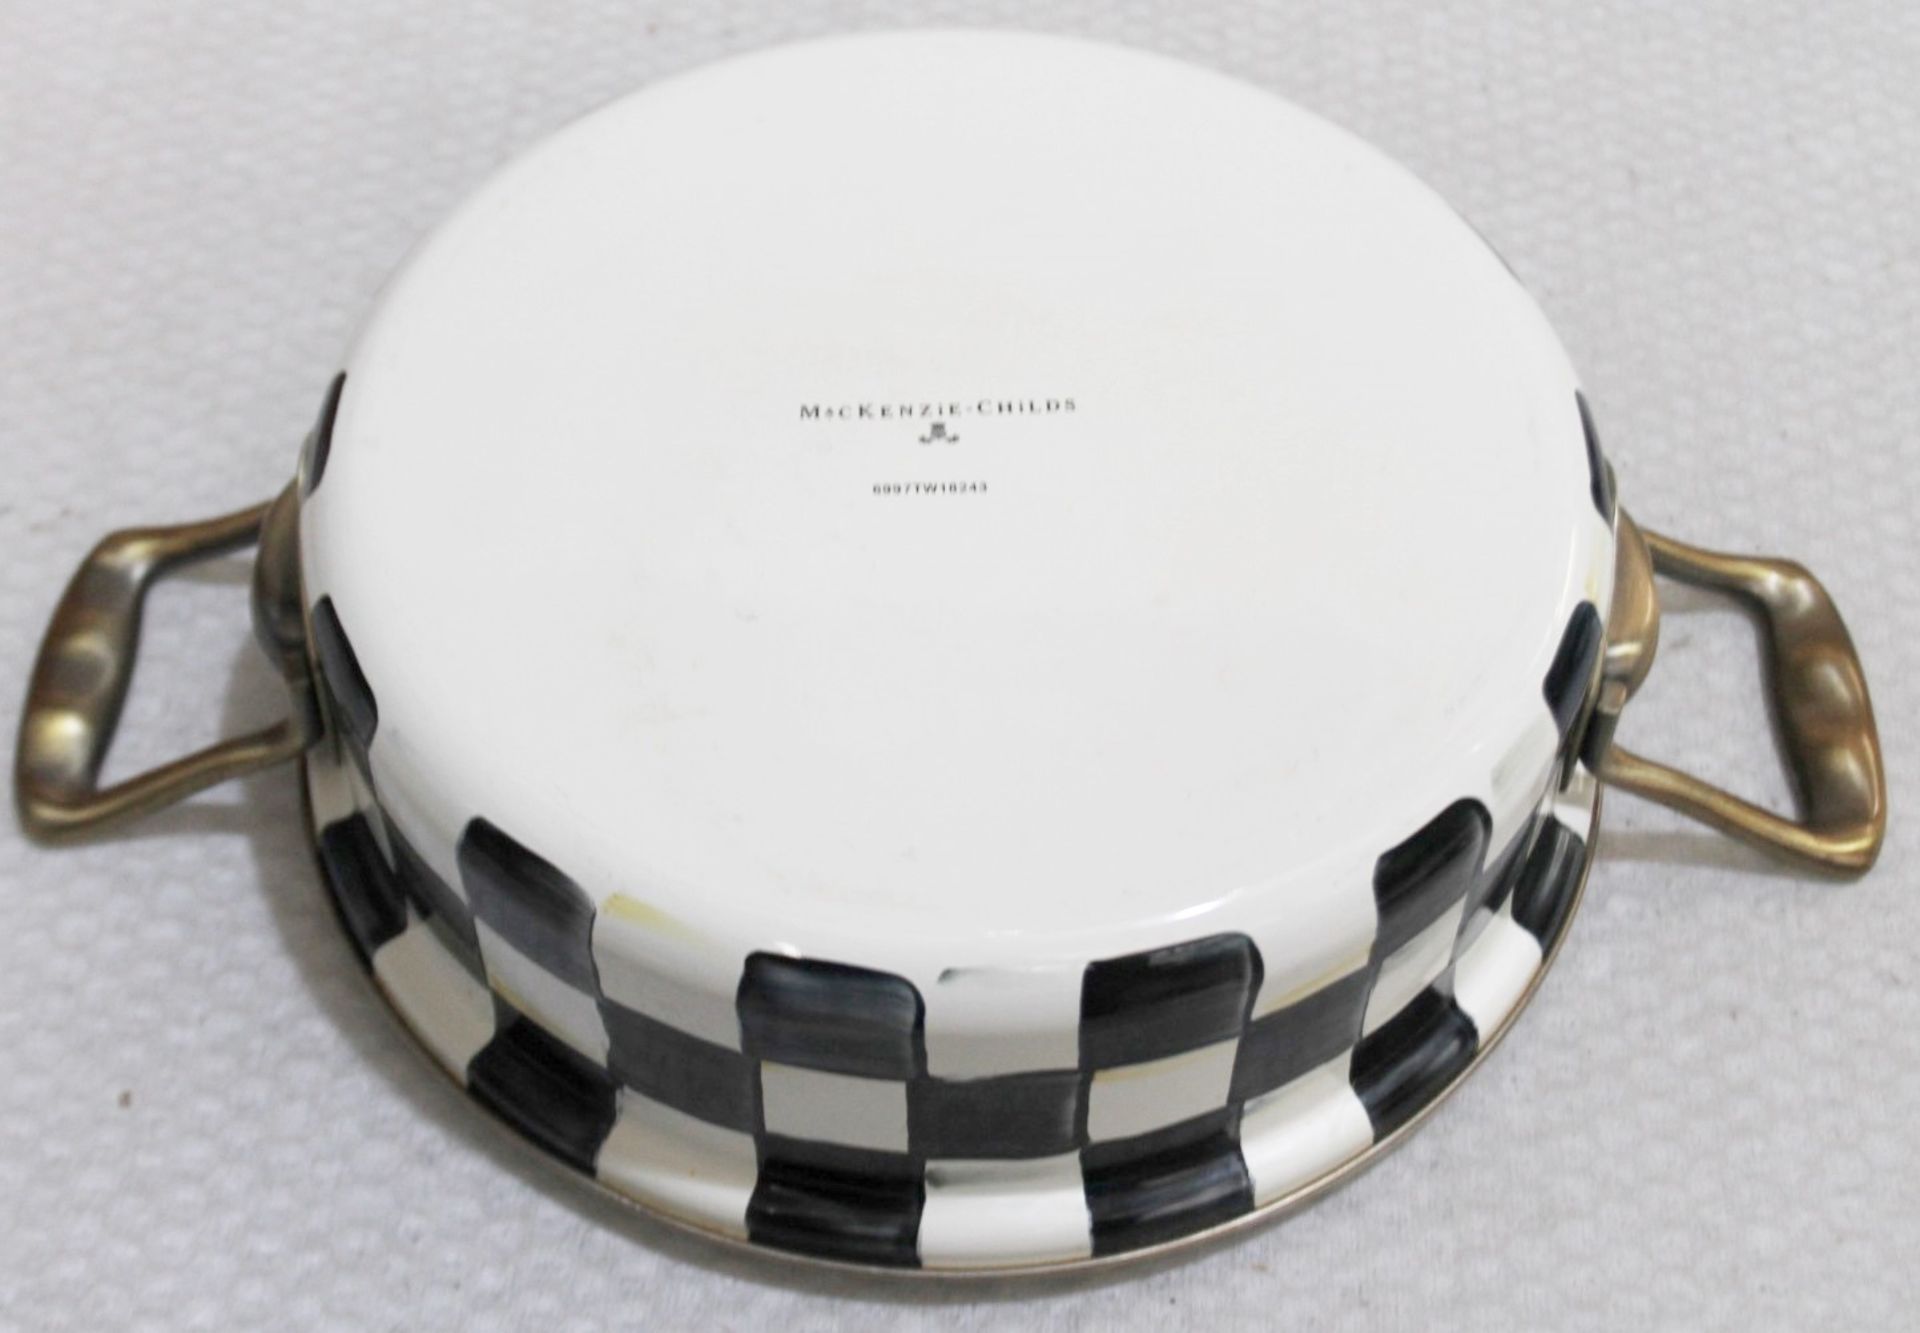 1 x MACKENZIE-CHILDS Courtly Check® Enamel 26cm Casserole Dish With Lid - Original Price £219.00 - - Image 6 of 7